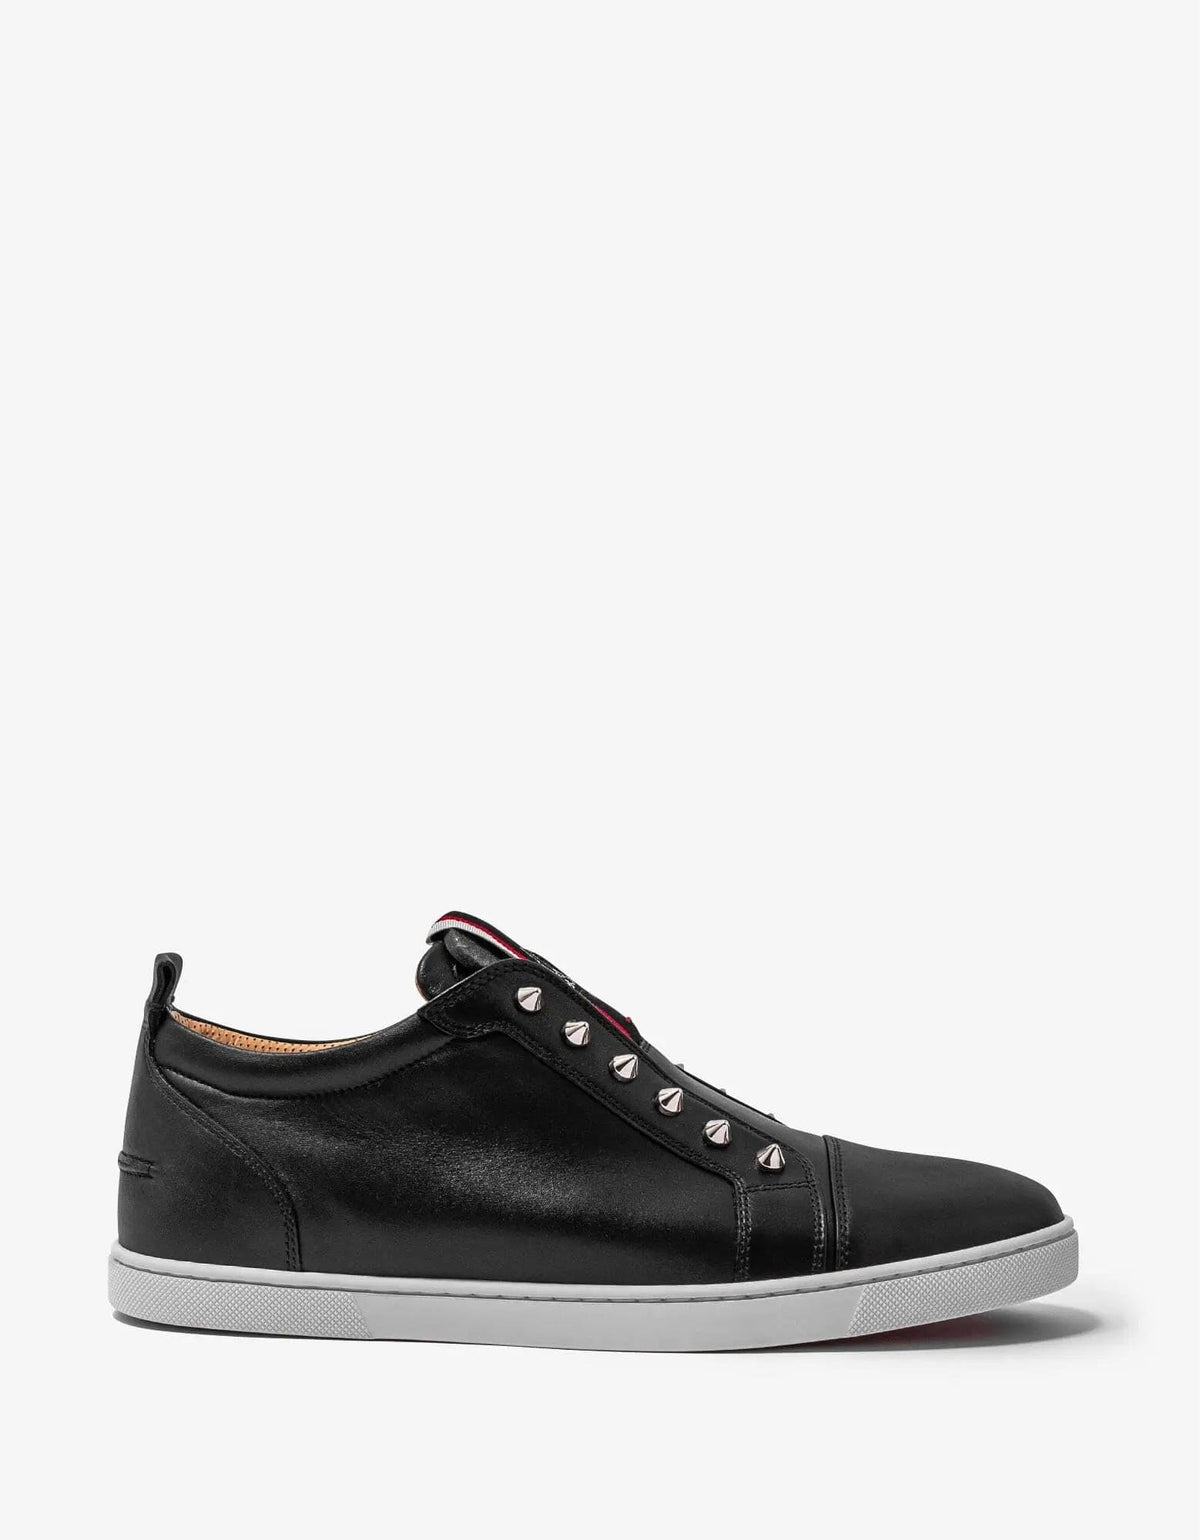 Christian Louboutin - F.A.V Fique A Vontade Black Leather Trainers -